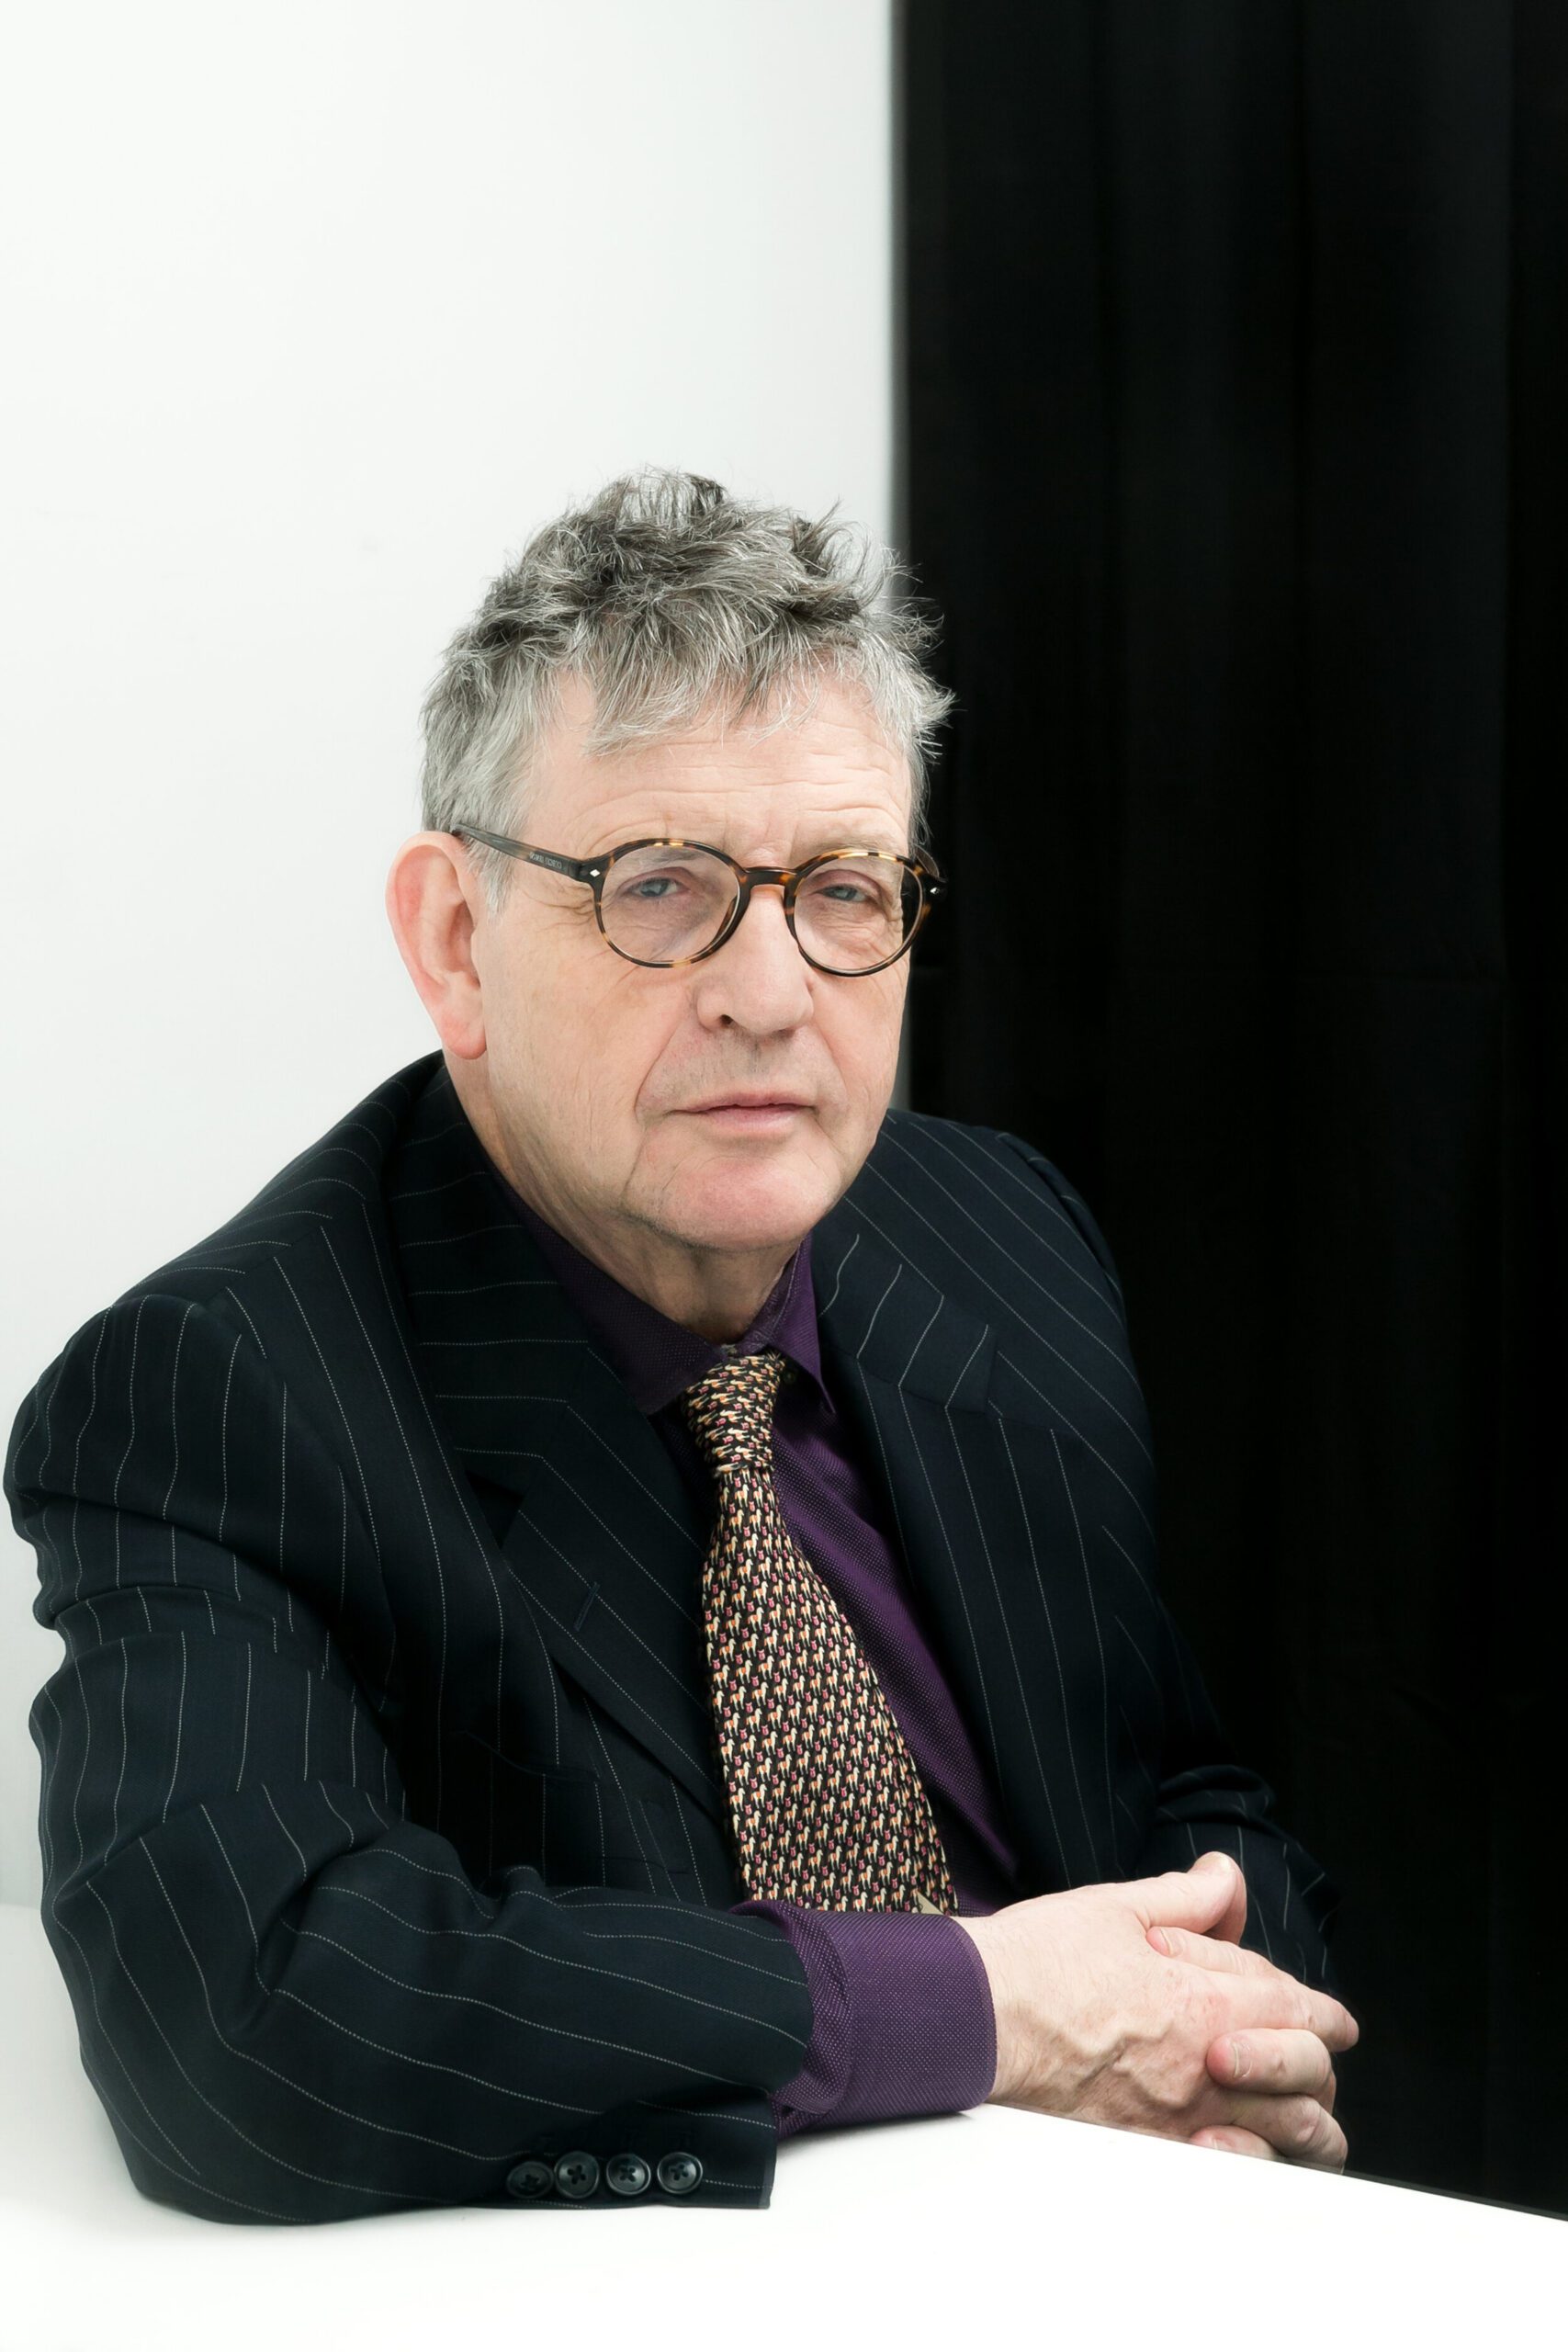 Paul Muldoon is reading Paul Muldoon at The Linen Hall